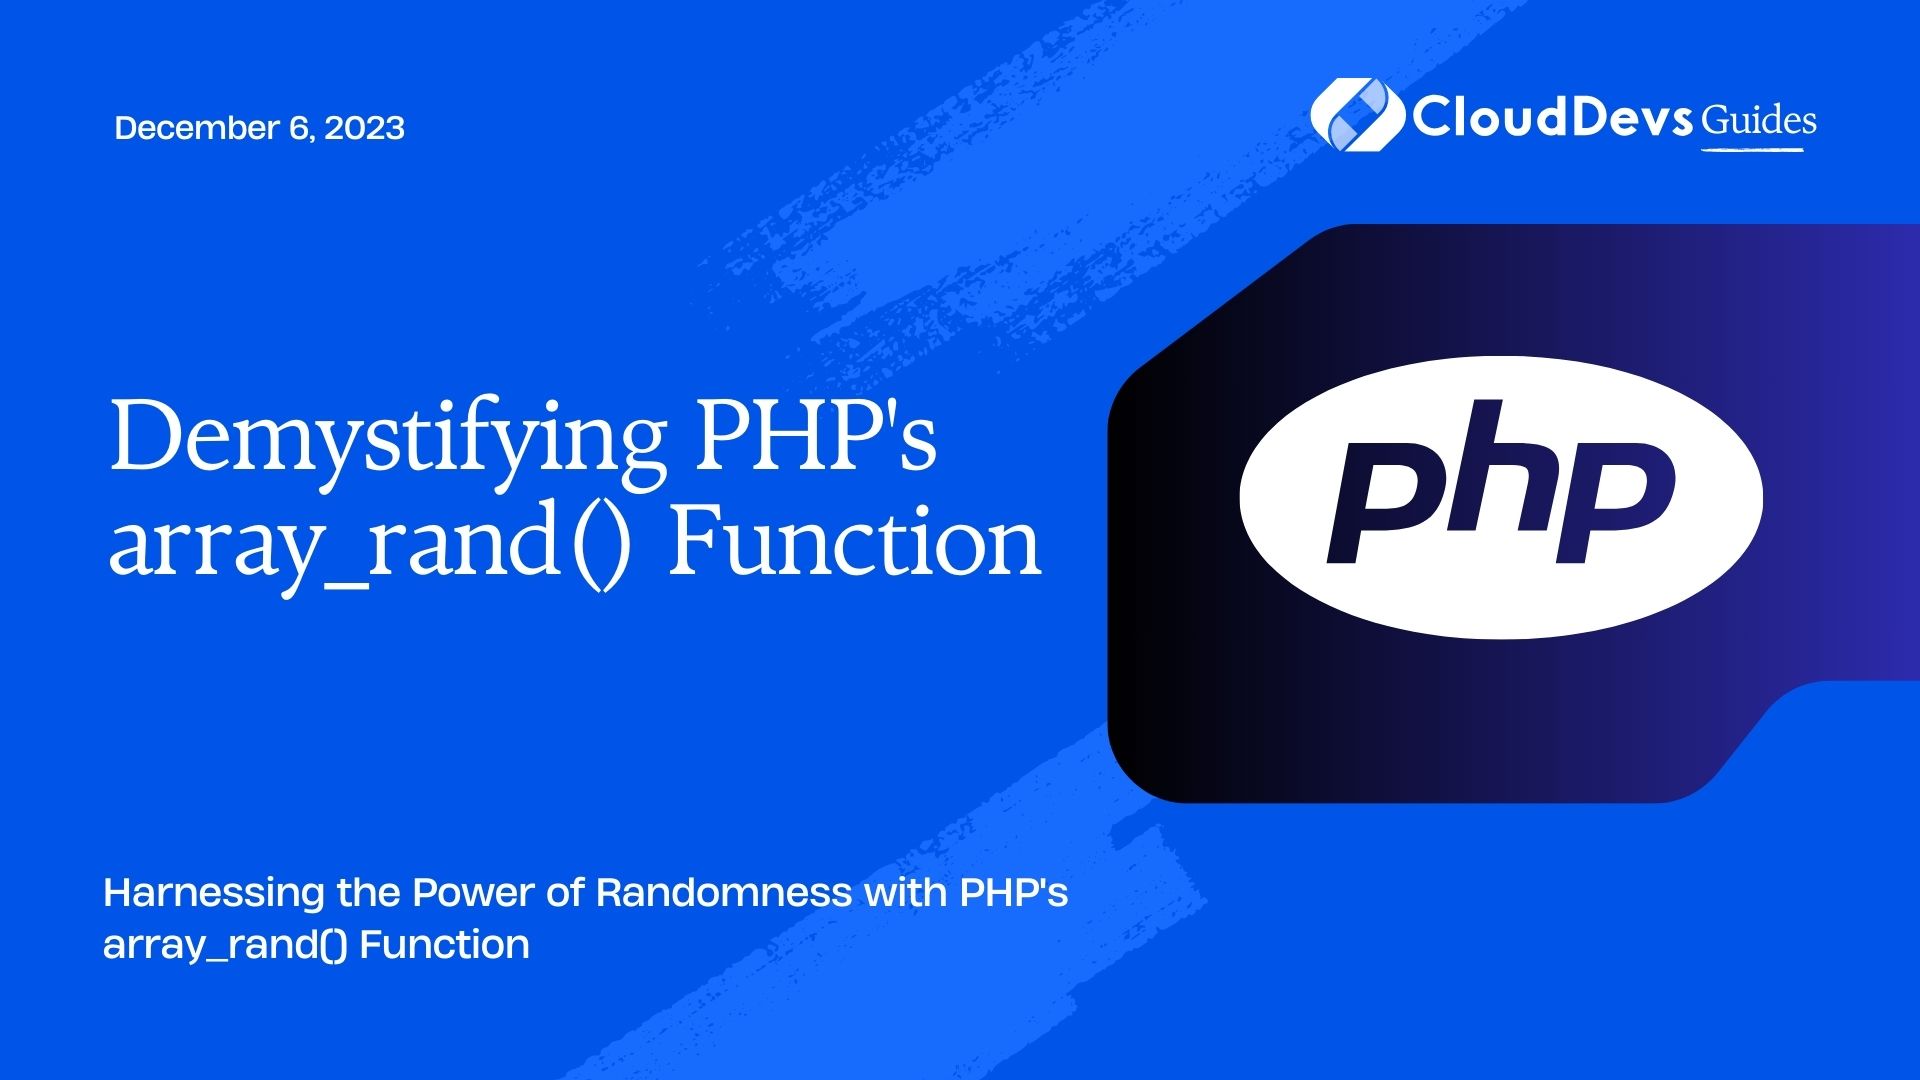 Demystifying PHP's array_rand() Function